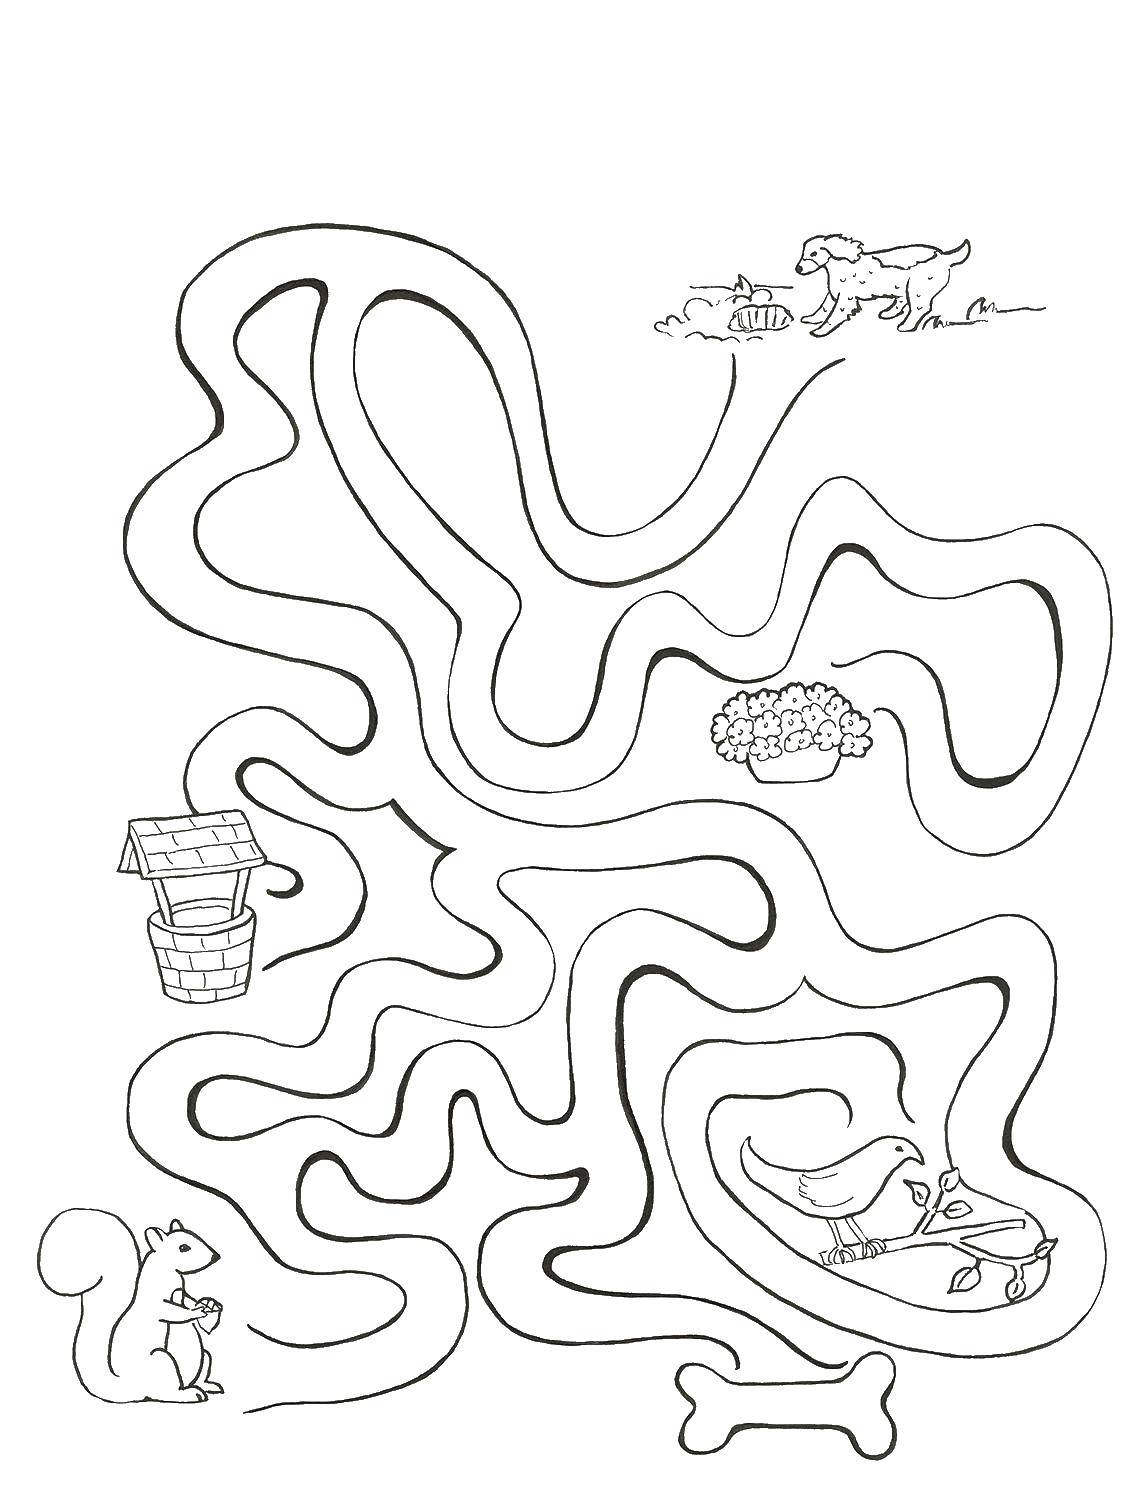 Coloring Help. Category Mazes. Tags:  Maze, logic.